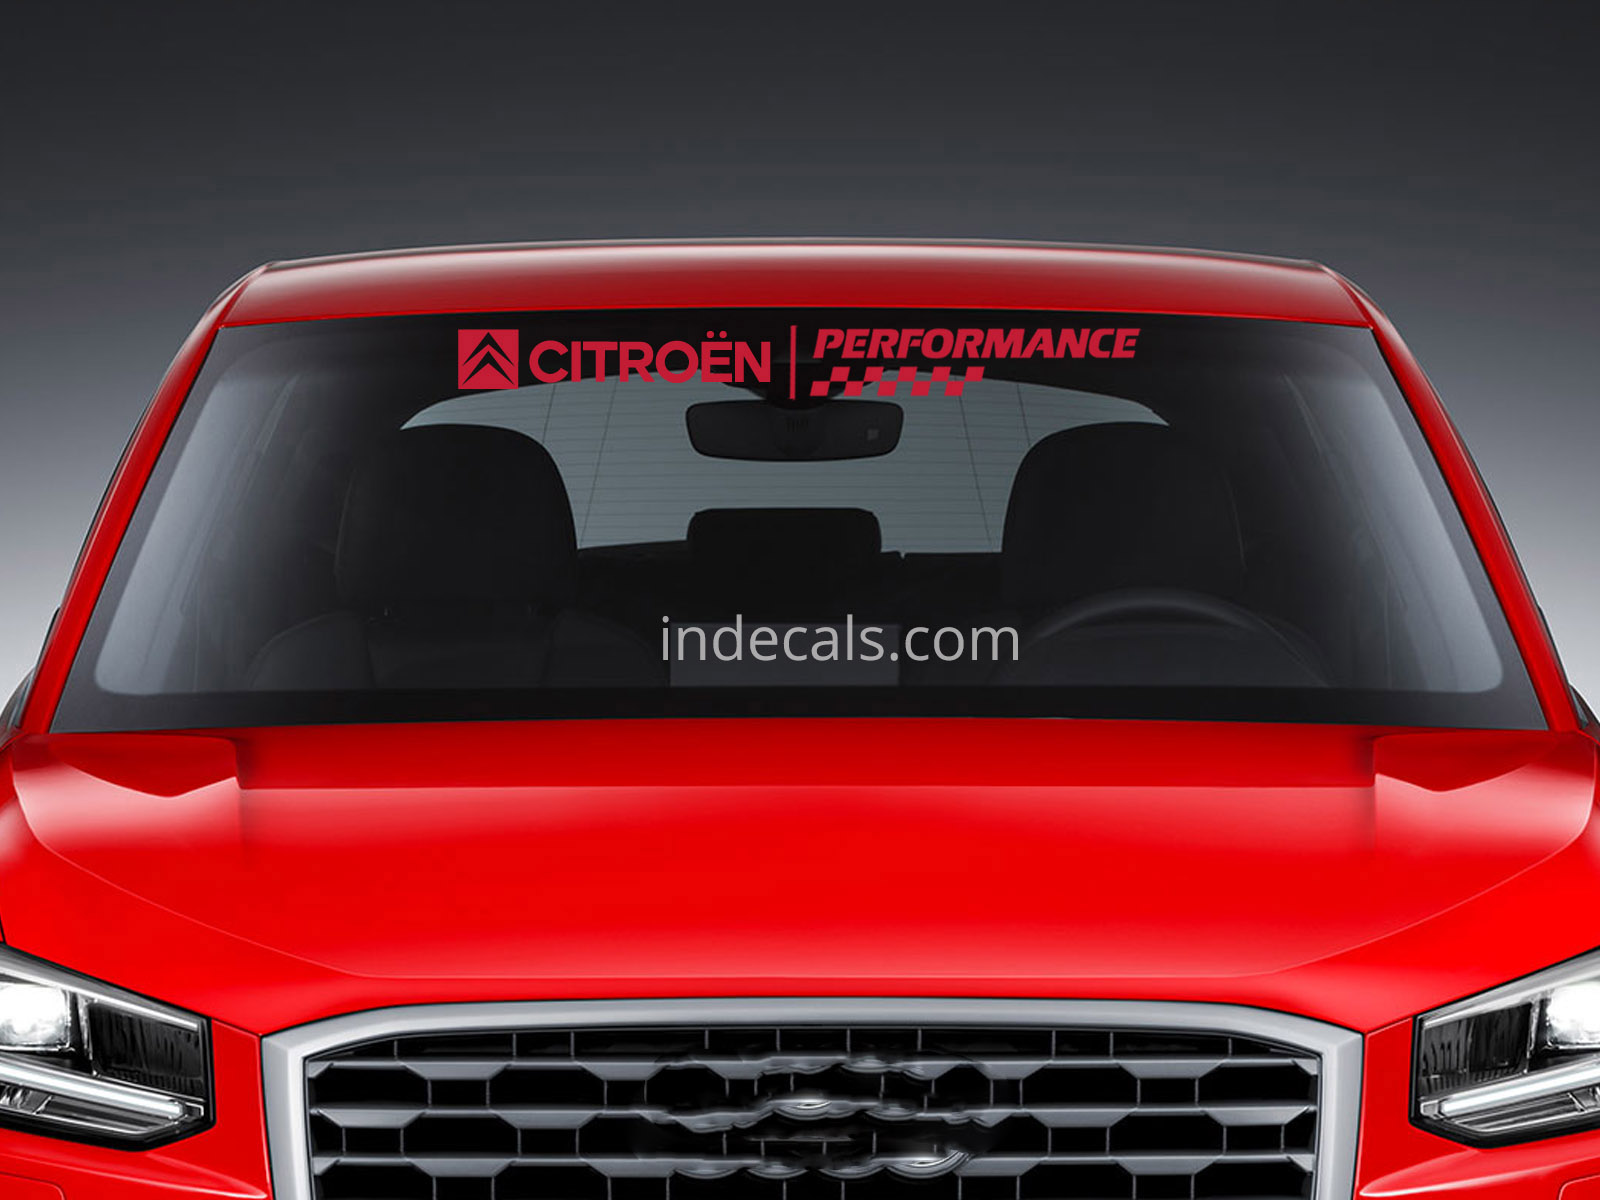 1 x Citroen Performance Sticker for Windshield or Back Window - Red